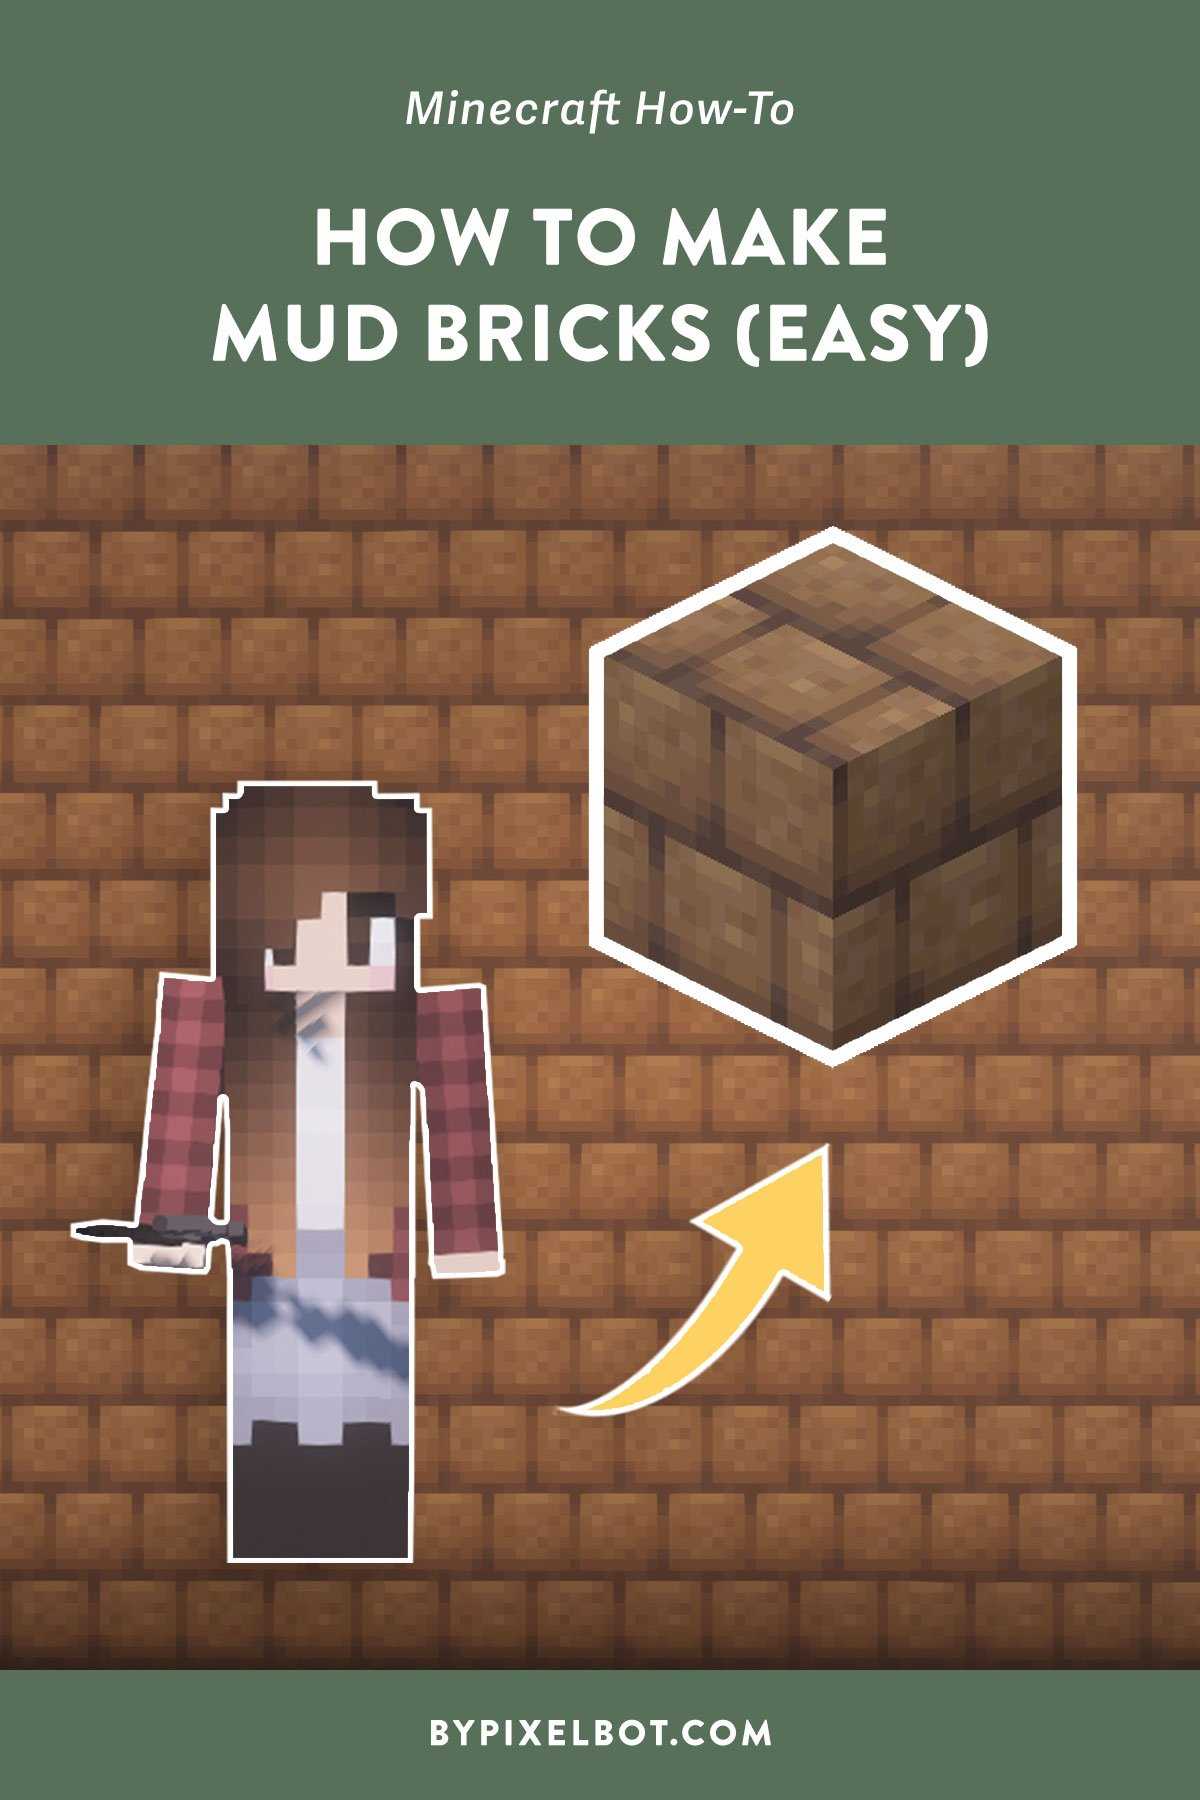 Materials Needed for Making Bricks